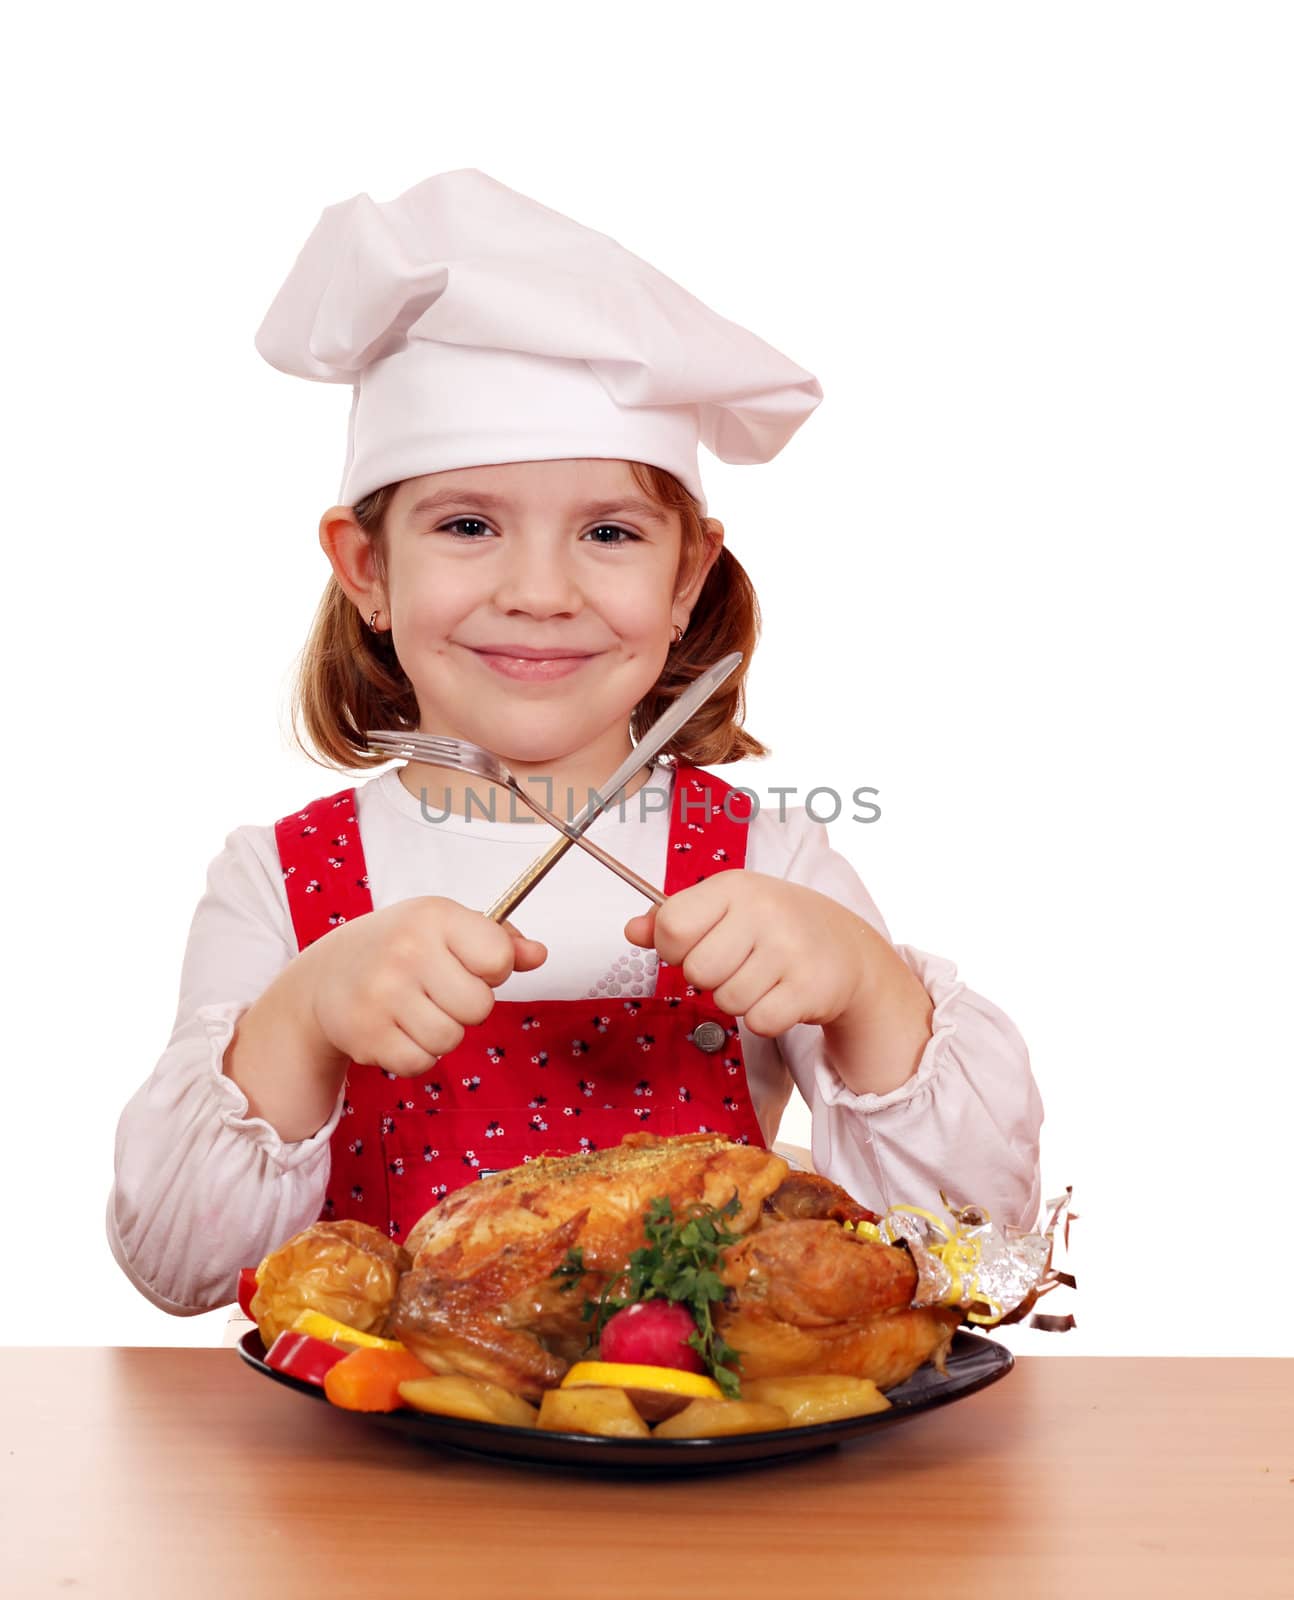 little girl cook with roasted chicken studio shot